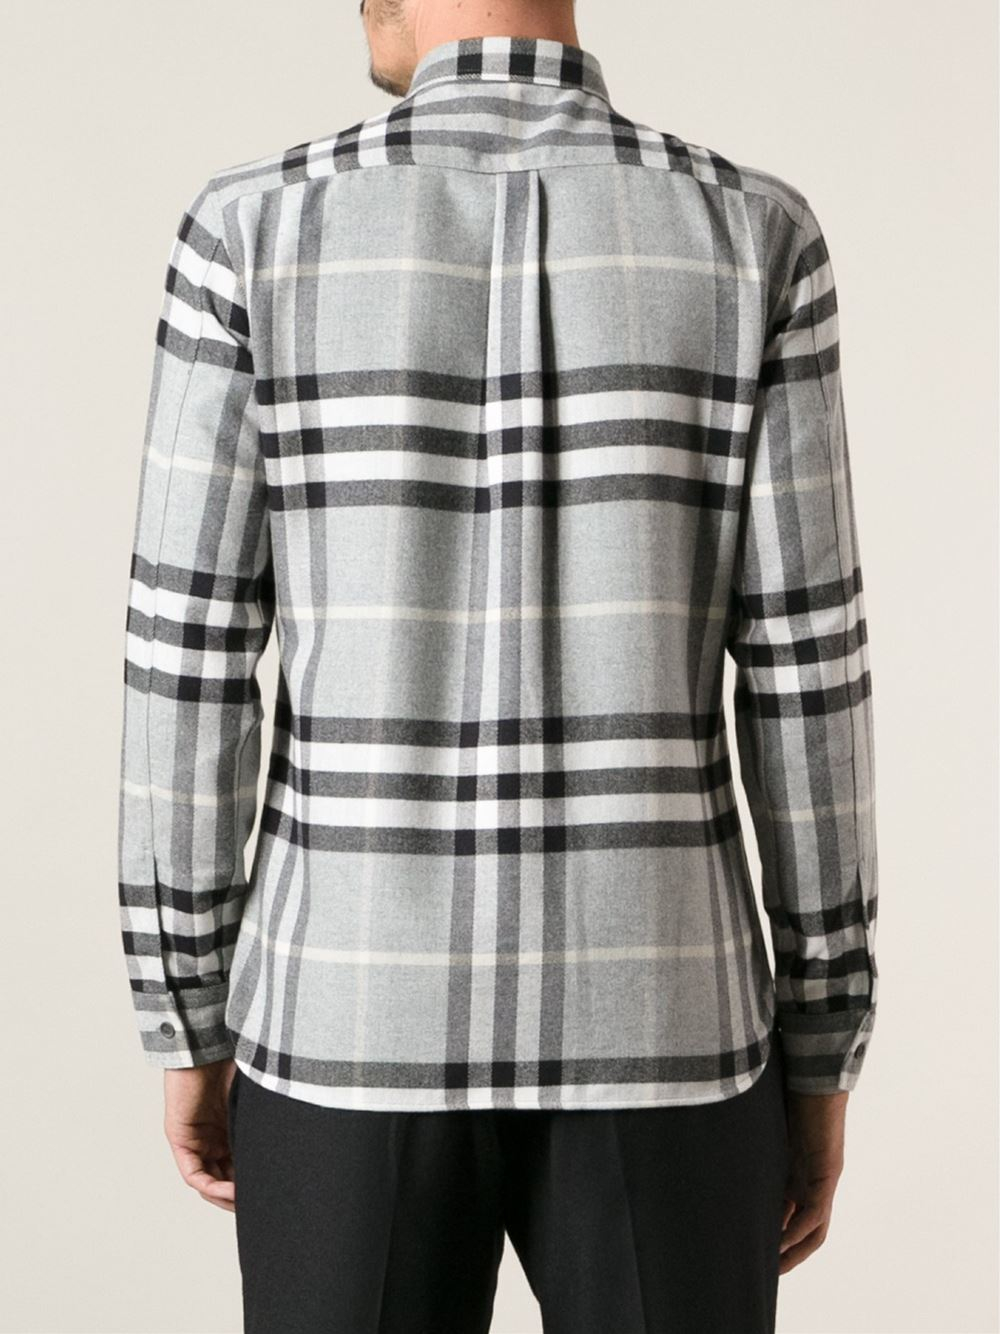 Lyst - Burberry brit Checked Flannel Shirt in Gray for Men